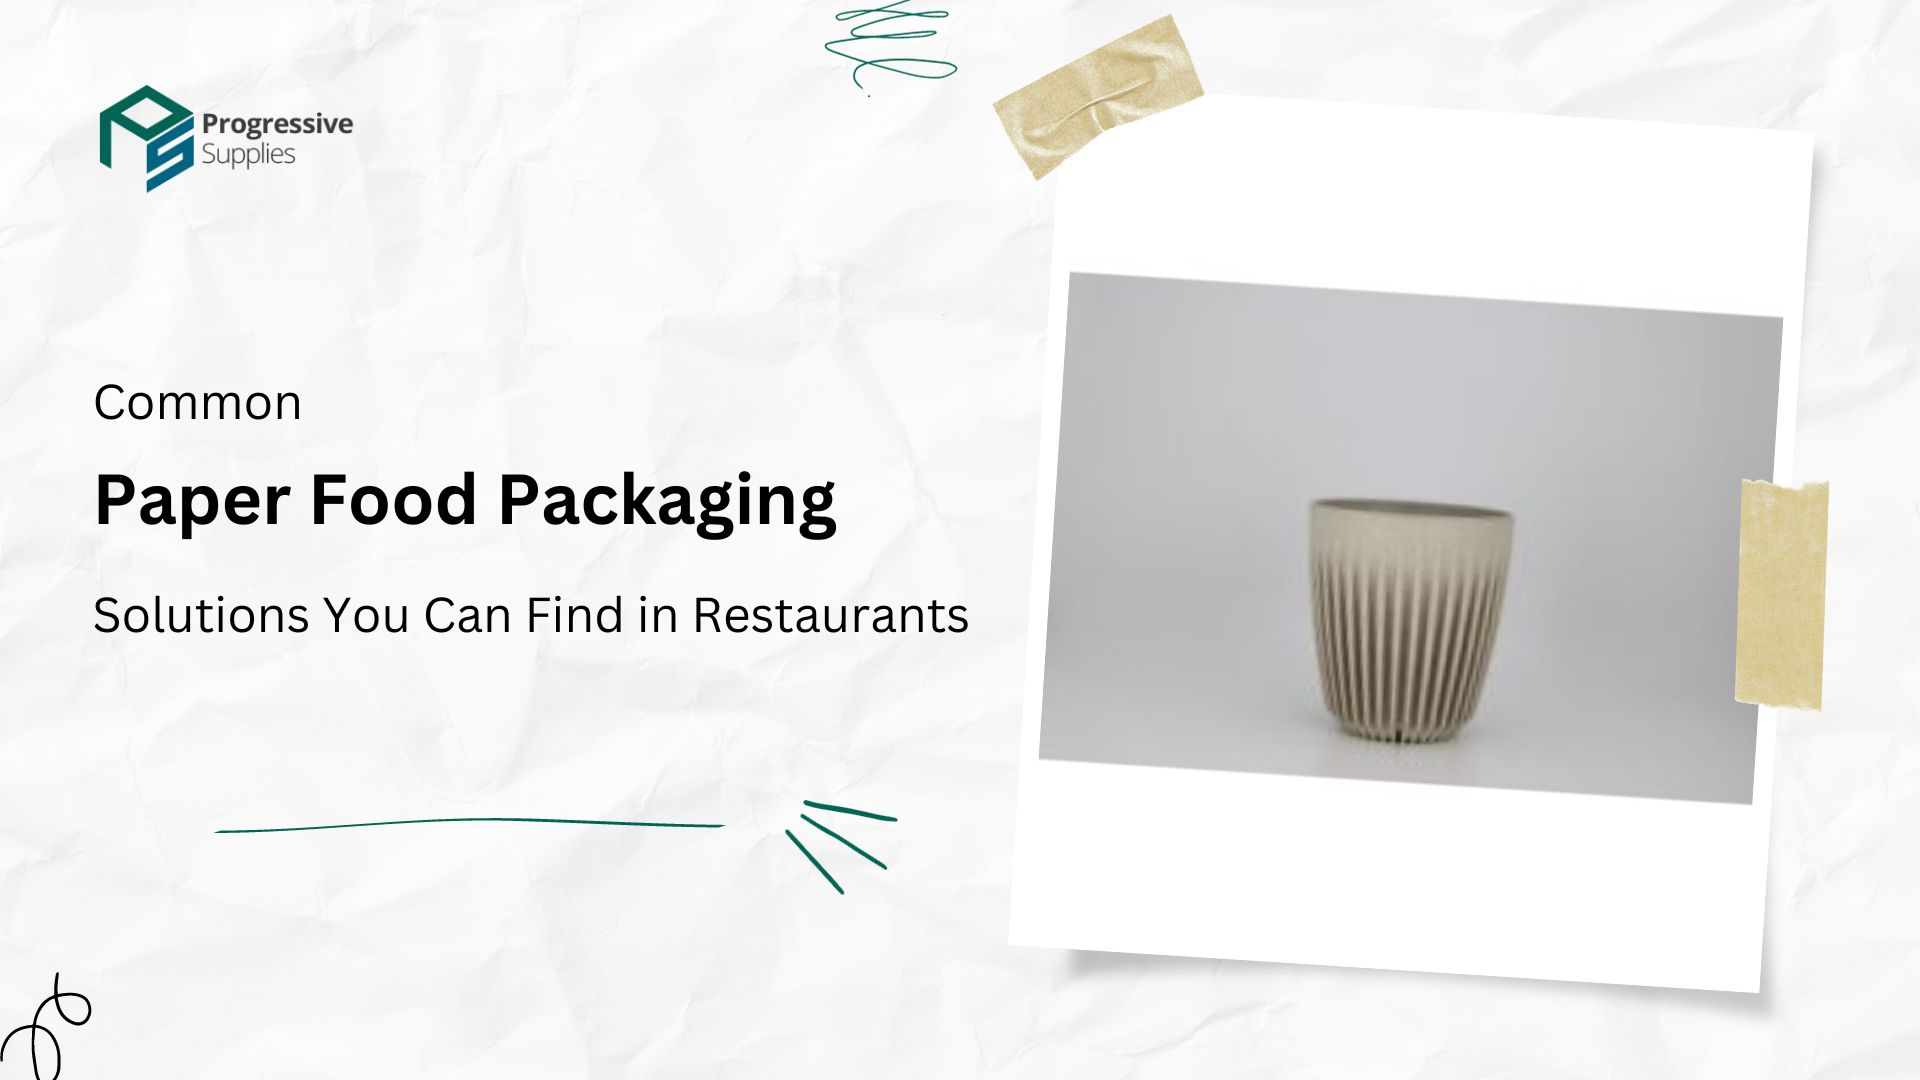 Common Paper Food Packaging Solutions You Can Find in Restaurants